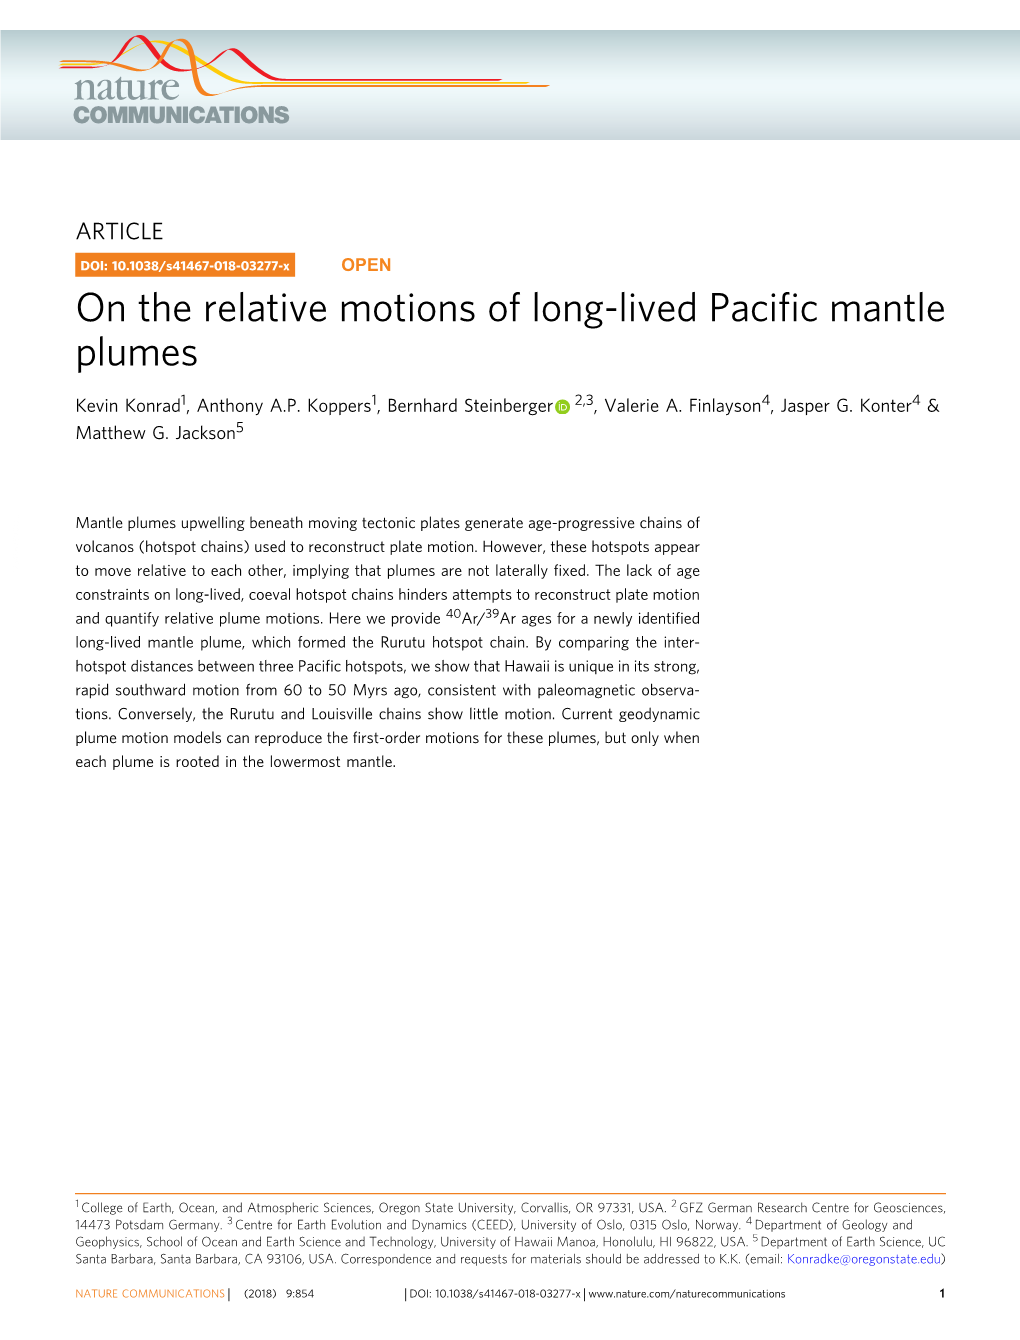 On the Relative Motions of Long-Lived Pacific Mantle Plumes